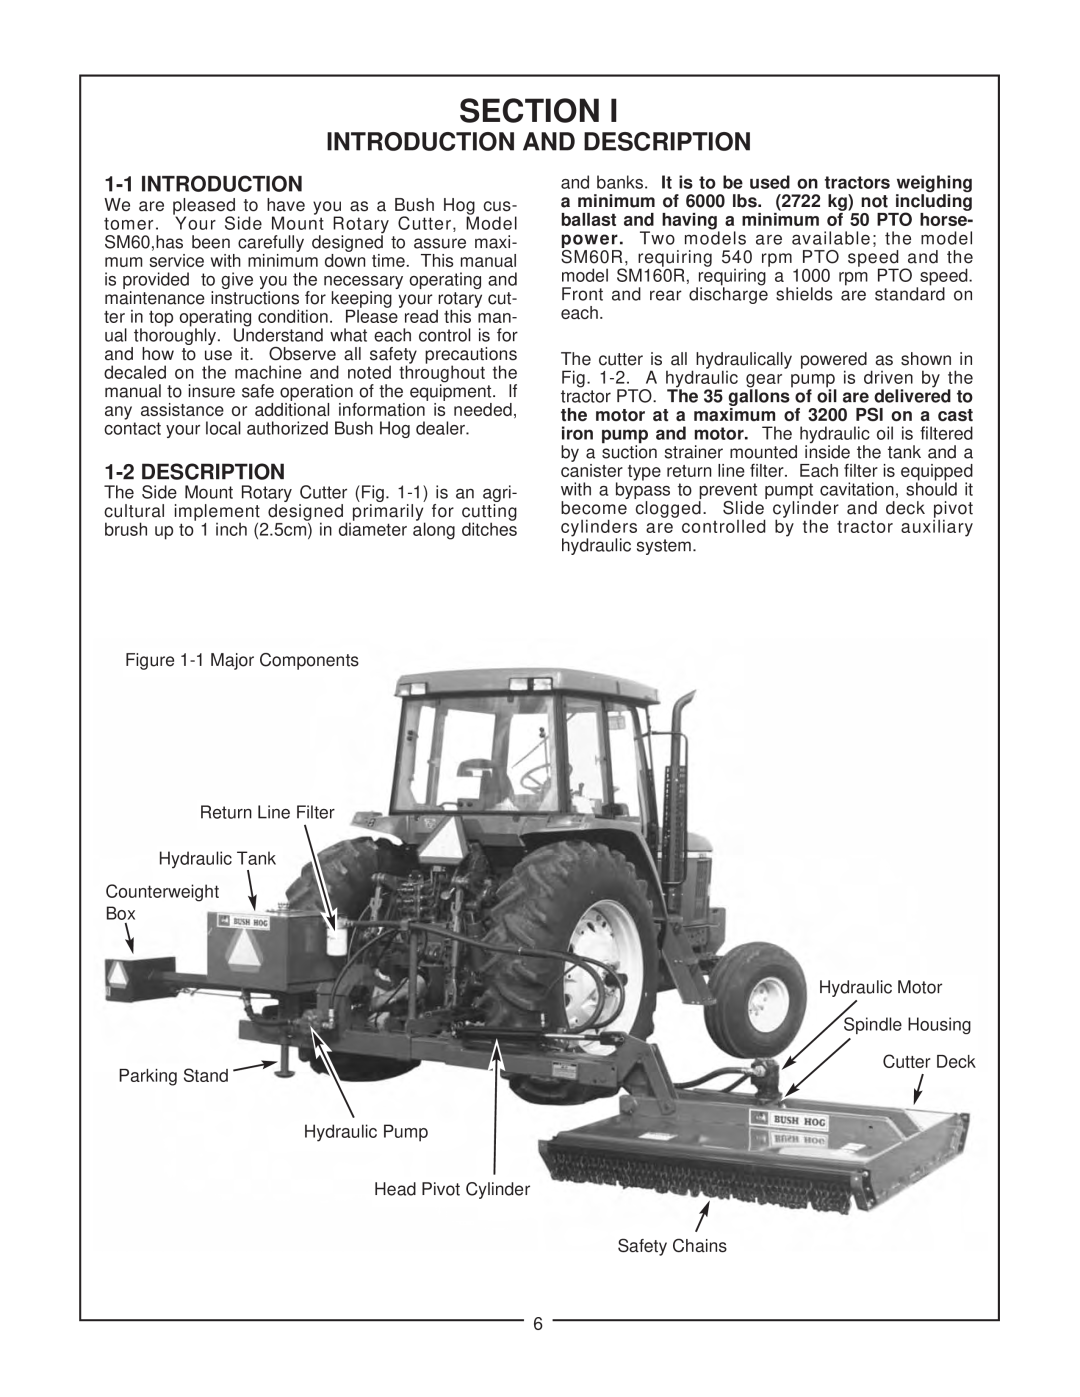 Bush Hog SM 60 manual Section, Introduction And Description, 1-1INTRODUCTION, 1-2DESCRIPTION 